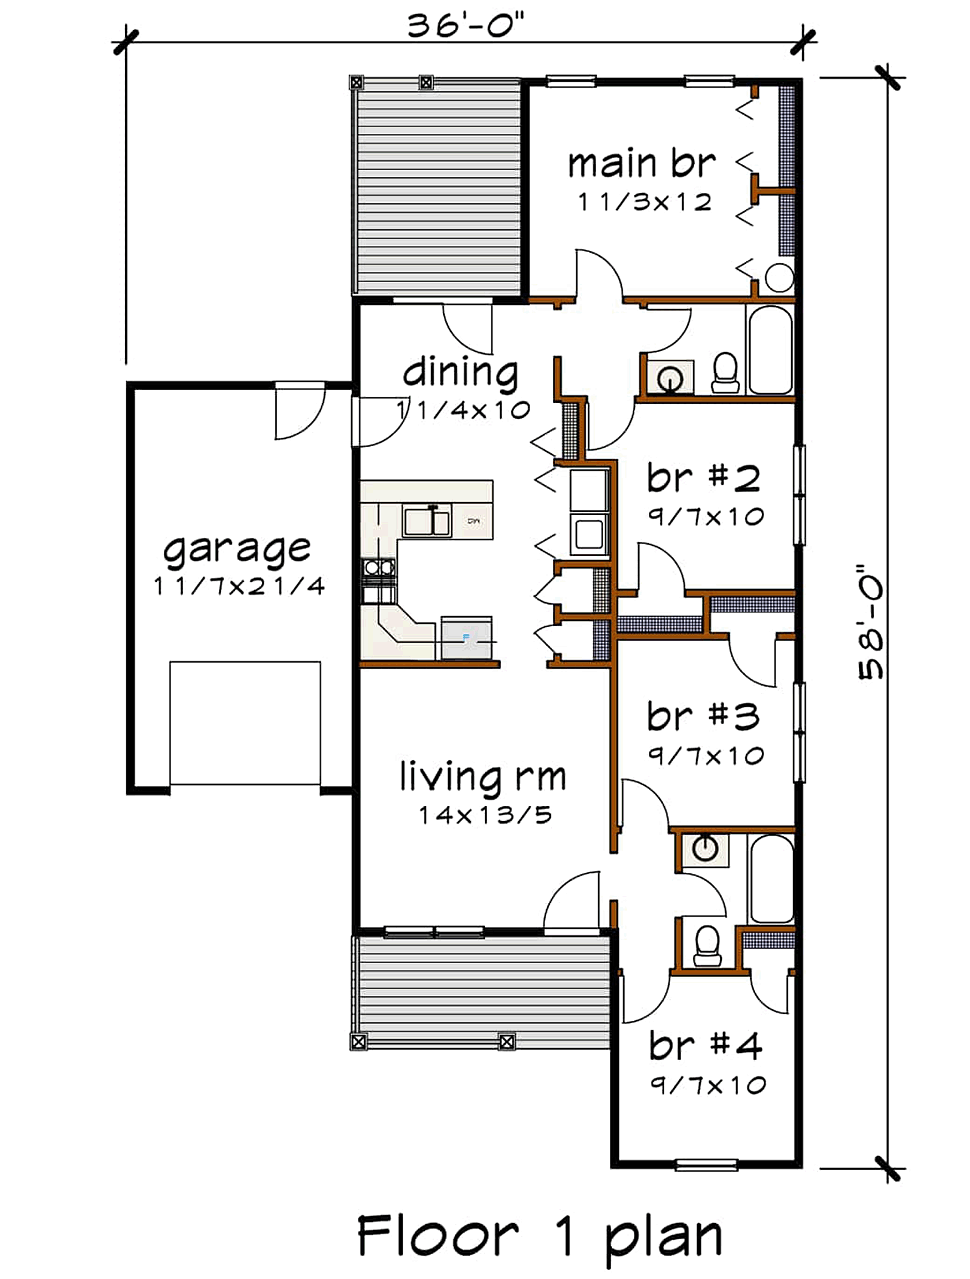 Cottage Style House Plan 75530 With 4 Bed 2 Bath 1 Car Garage